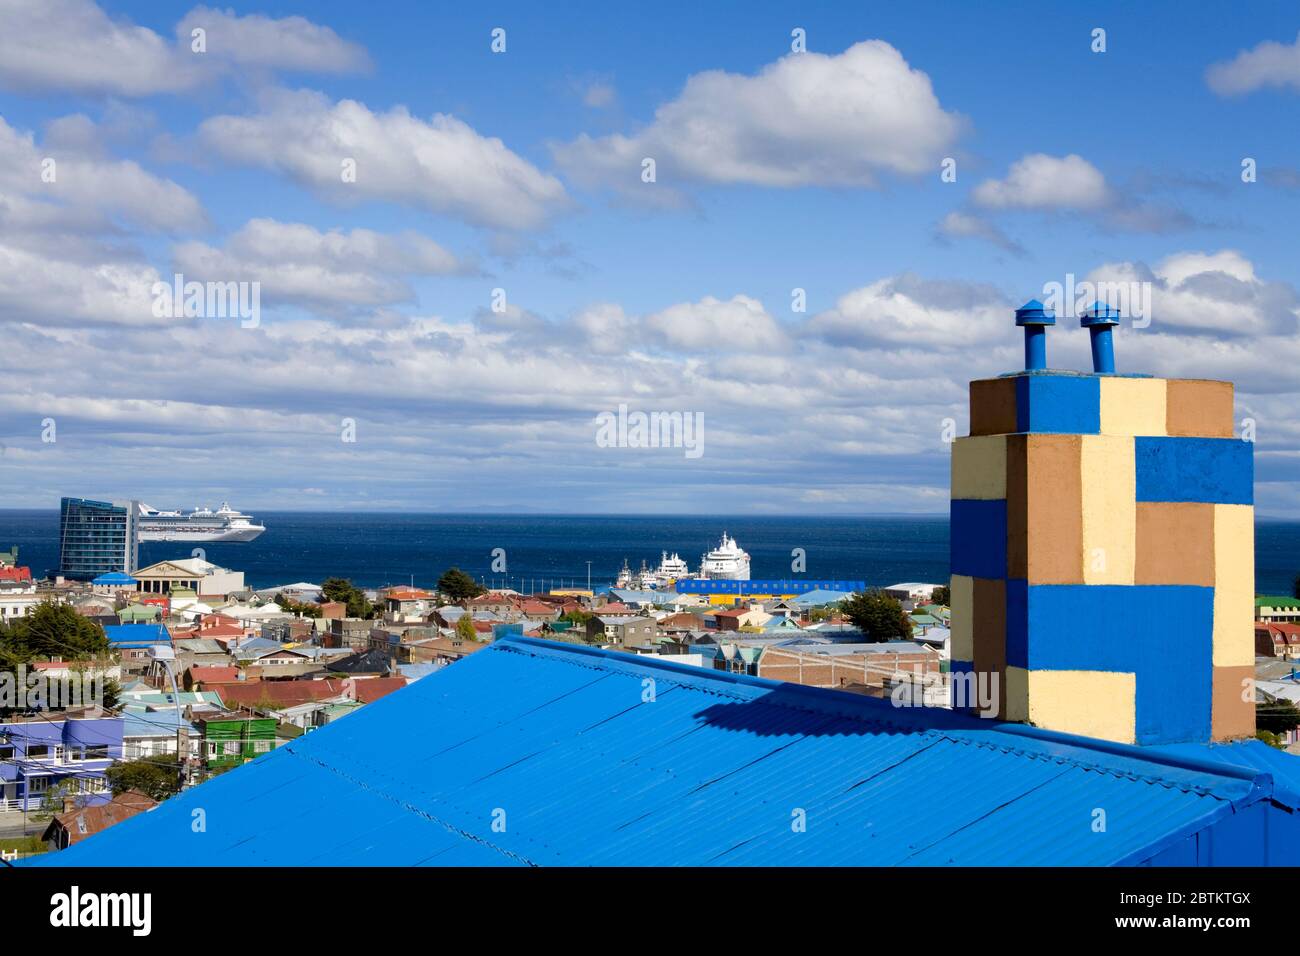 View of Punta Arenas City from La Cruz Hill, Magallanes Province, Patagonia, Chile, South America Stock Photo